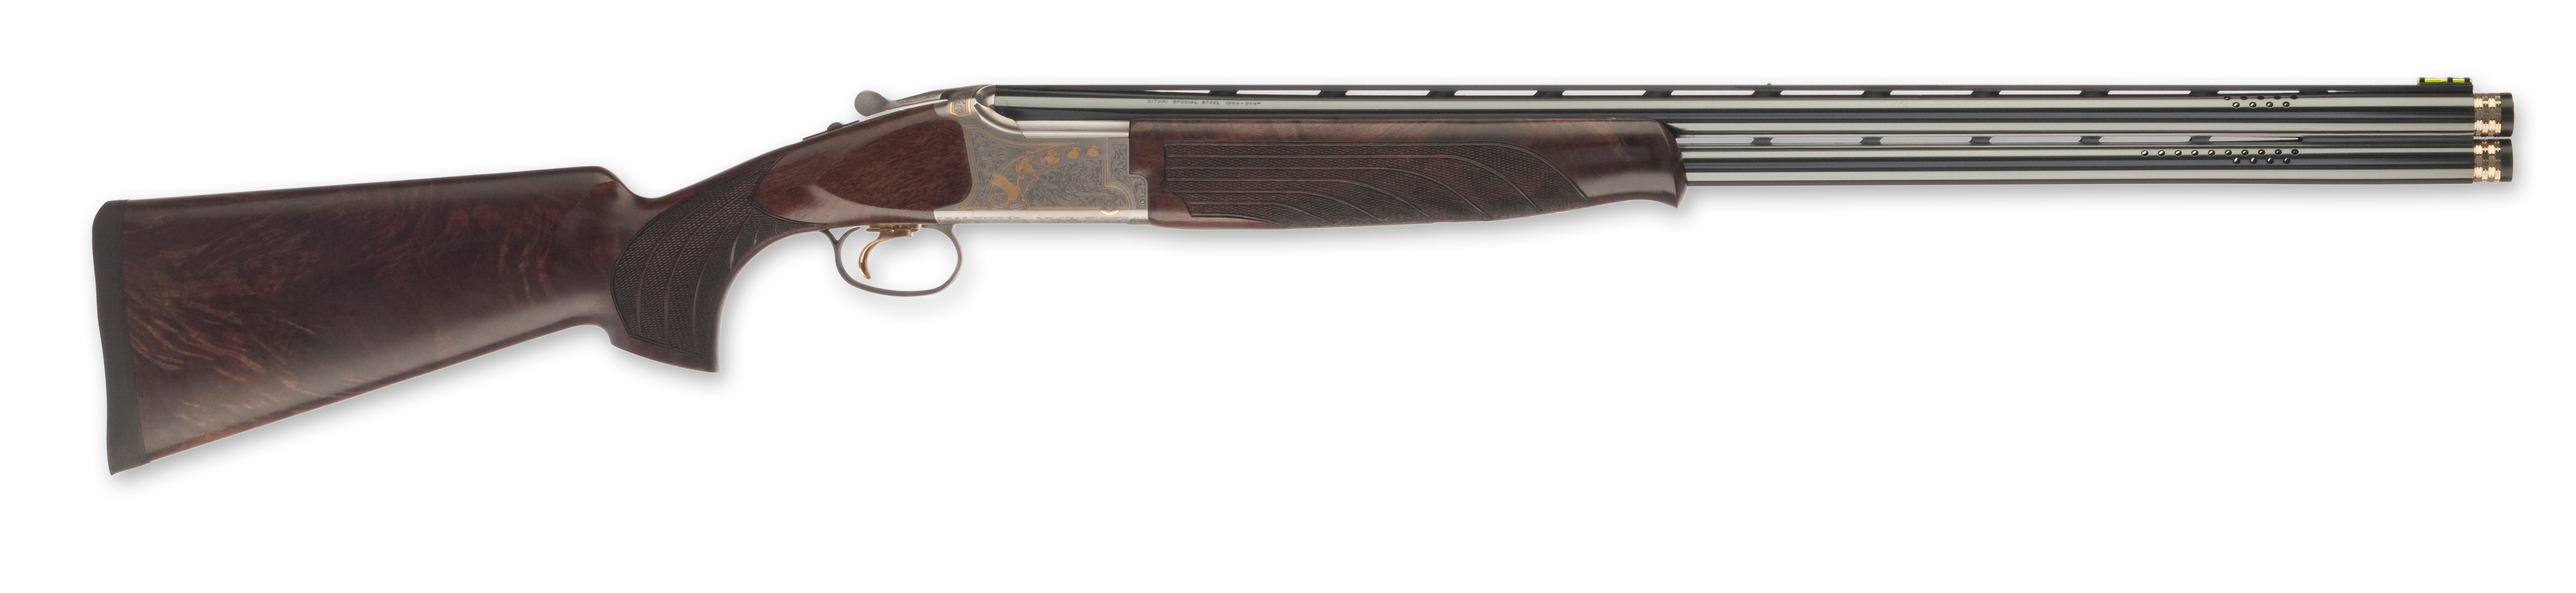 Browning Citori 625 Sporting Golden Clays